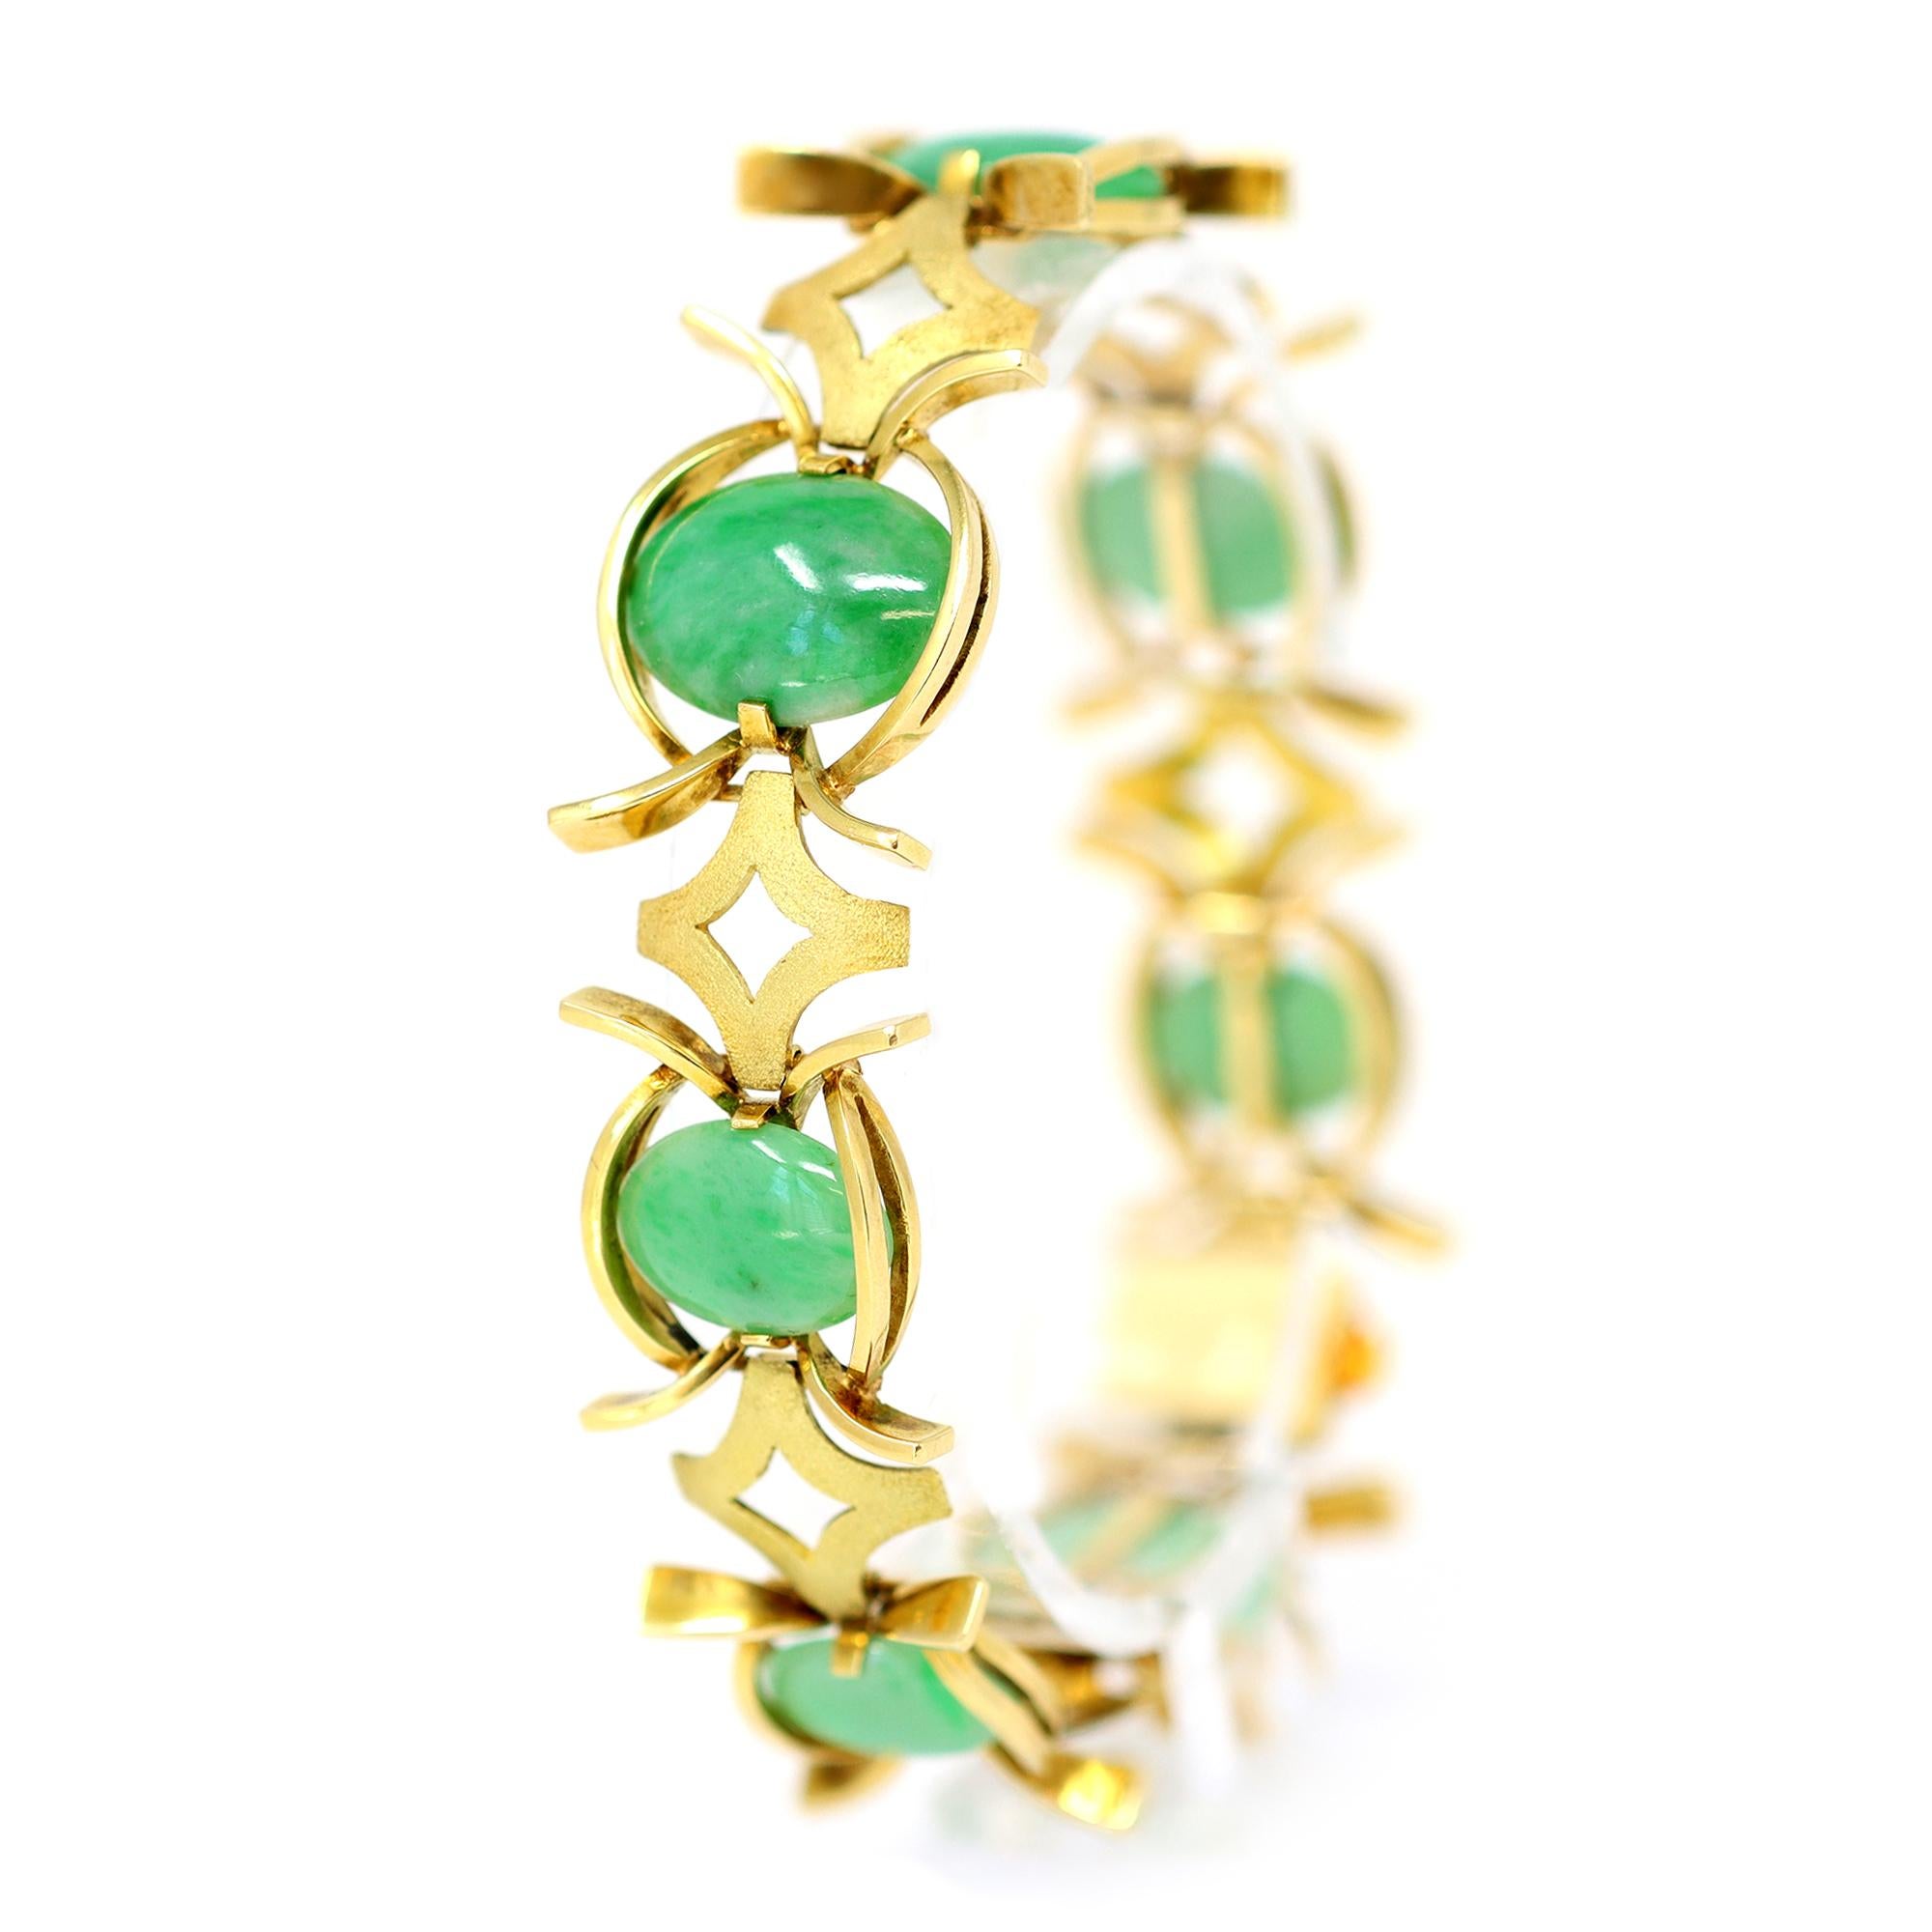 A Jadeite jade cabochon and 18 karat yellow gold bracelet, designed as segment style textured gold links spaced by the jade cabochons. The gross weight is 46.7 grams, length 7¾ inches, width ⅞ inch. The bracelet is circa 1970.